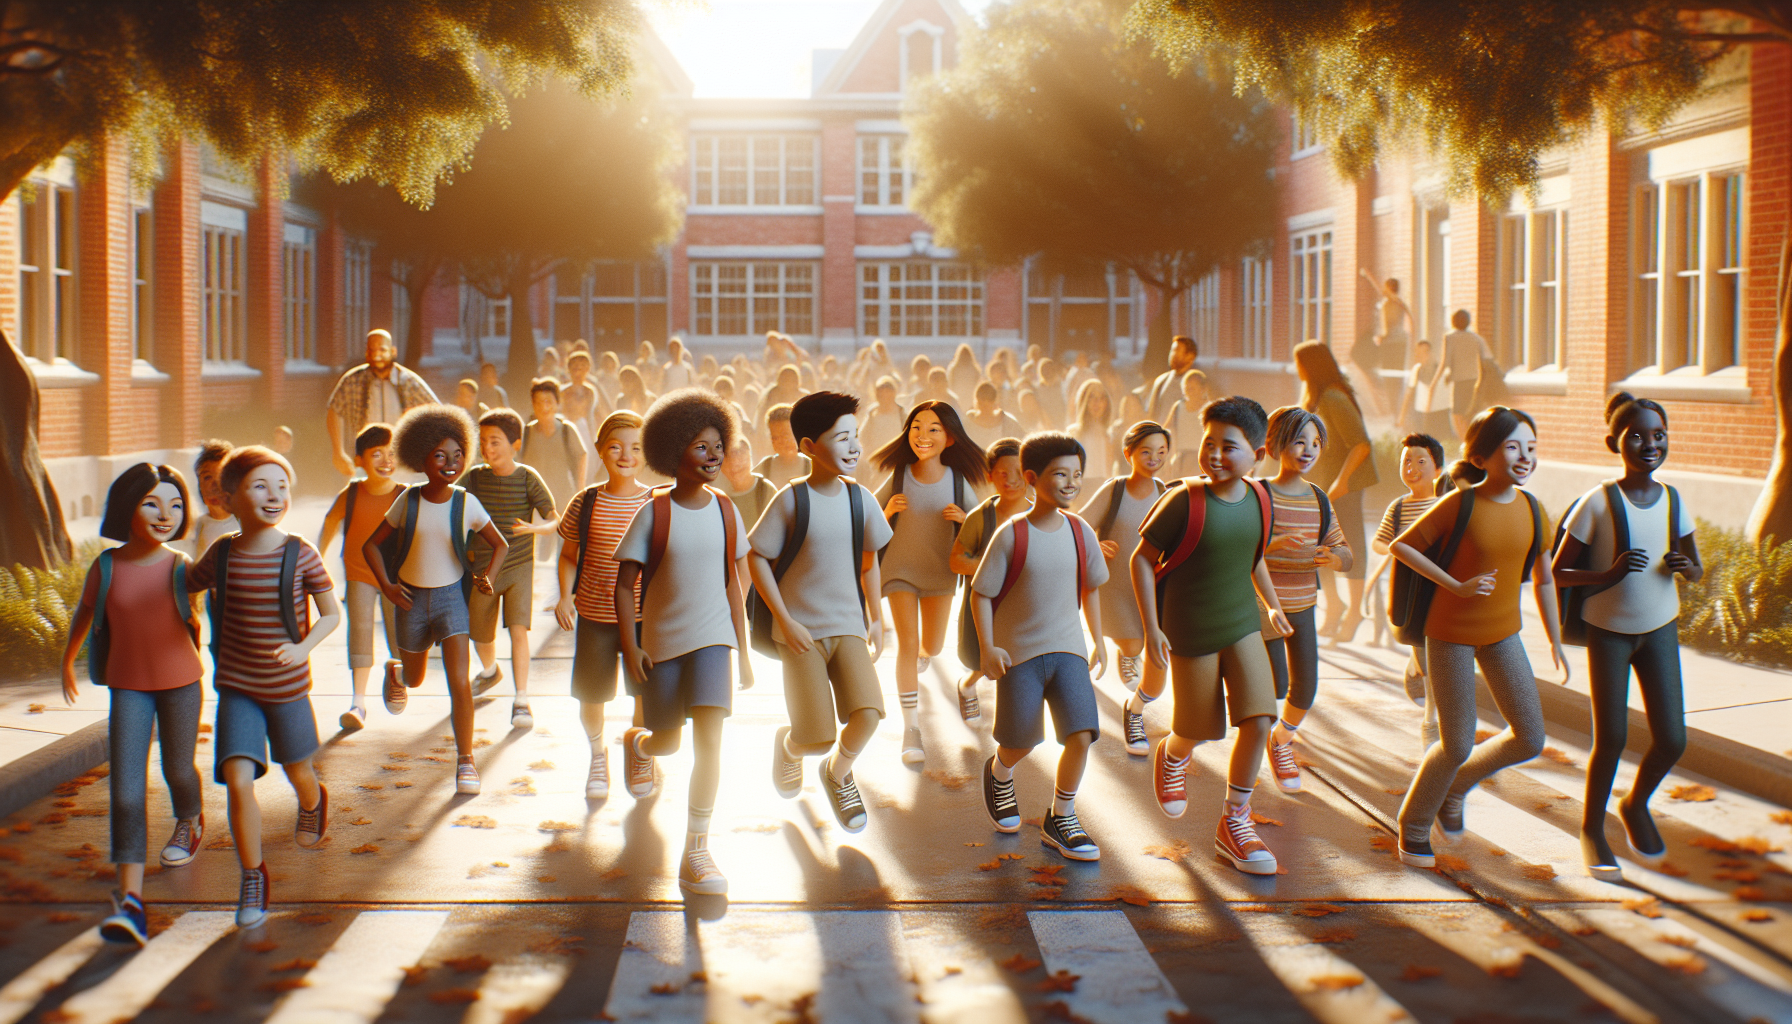 children waking to school on a bright sunny day with new sneakers